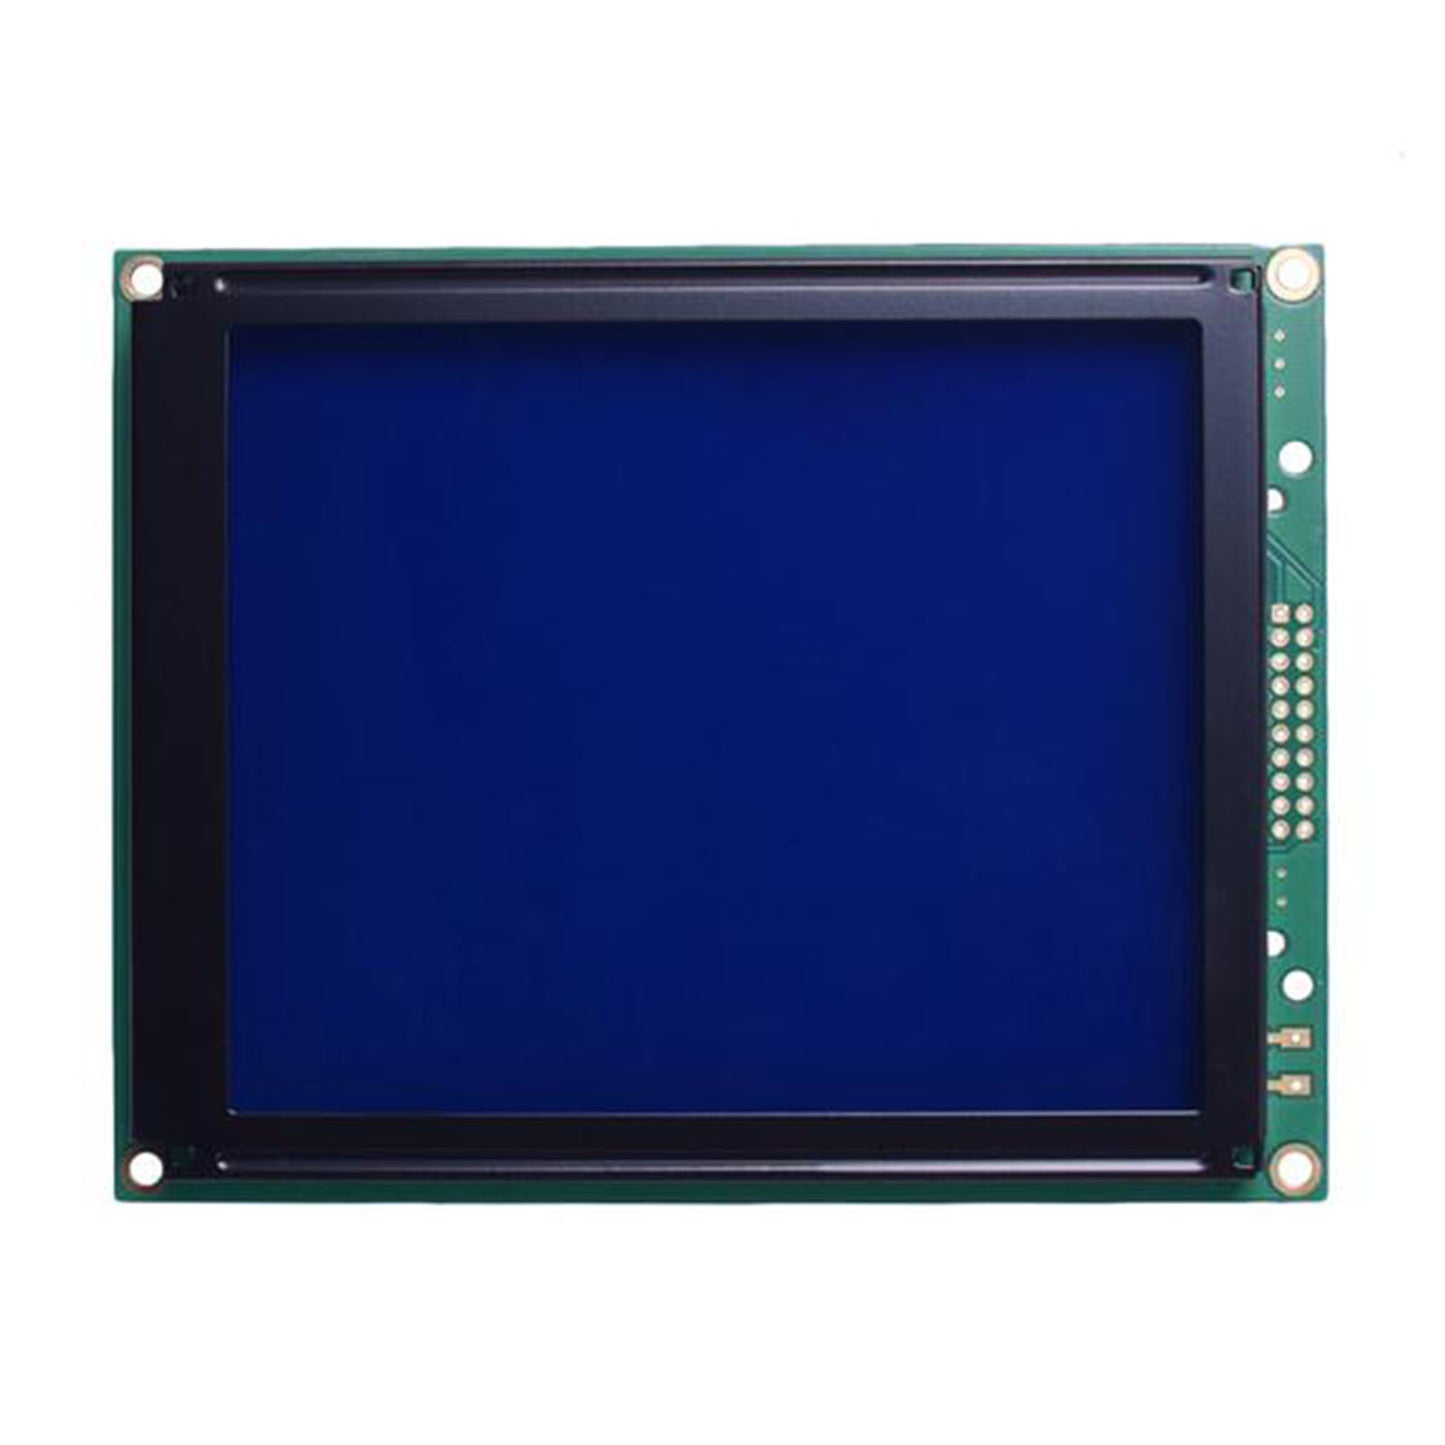 160x128 blue graphic LCD 5.12 inch display module with MCU interface